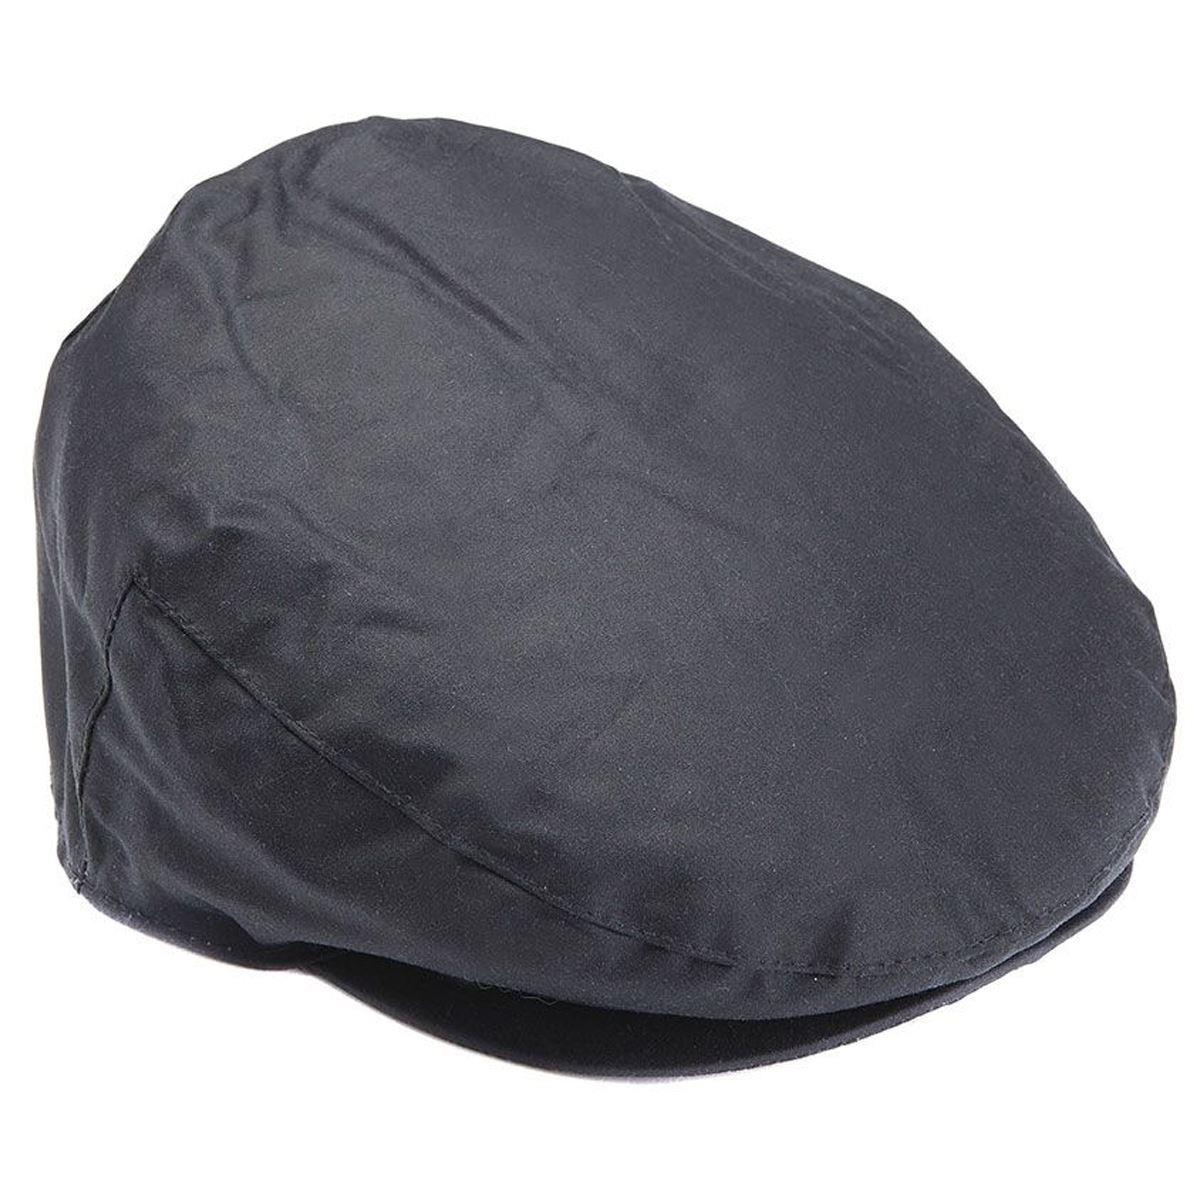 Barbour Mens Wax Cap Questions & Answers